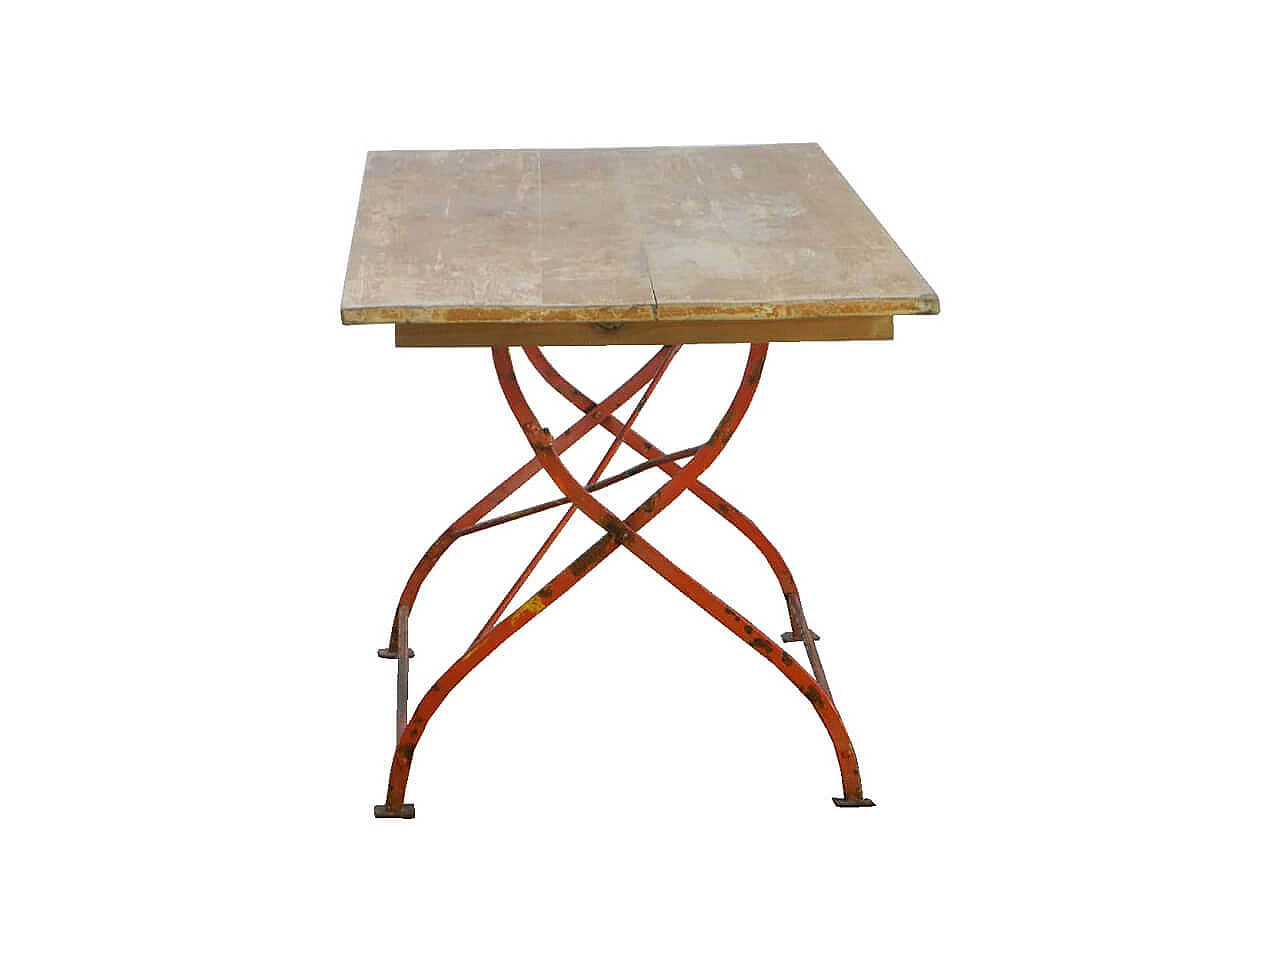 Iron and larch wood table, foldable, 1920s 1062269